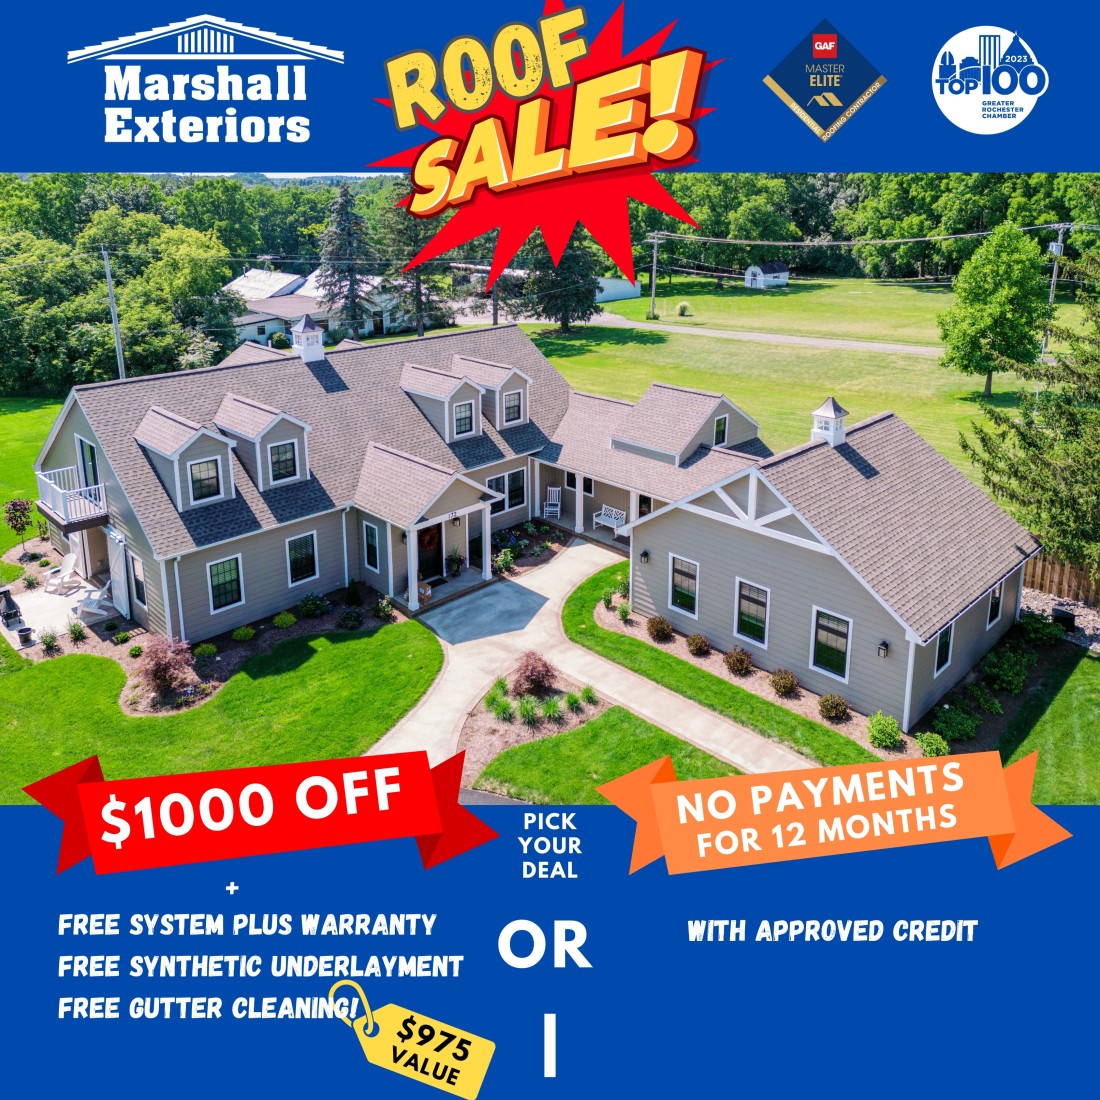 Roof Sale - Marshall Exteriors - New_roof_sale_small